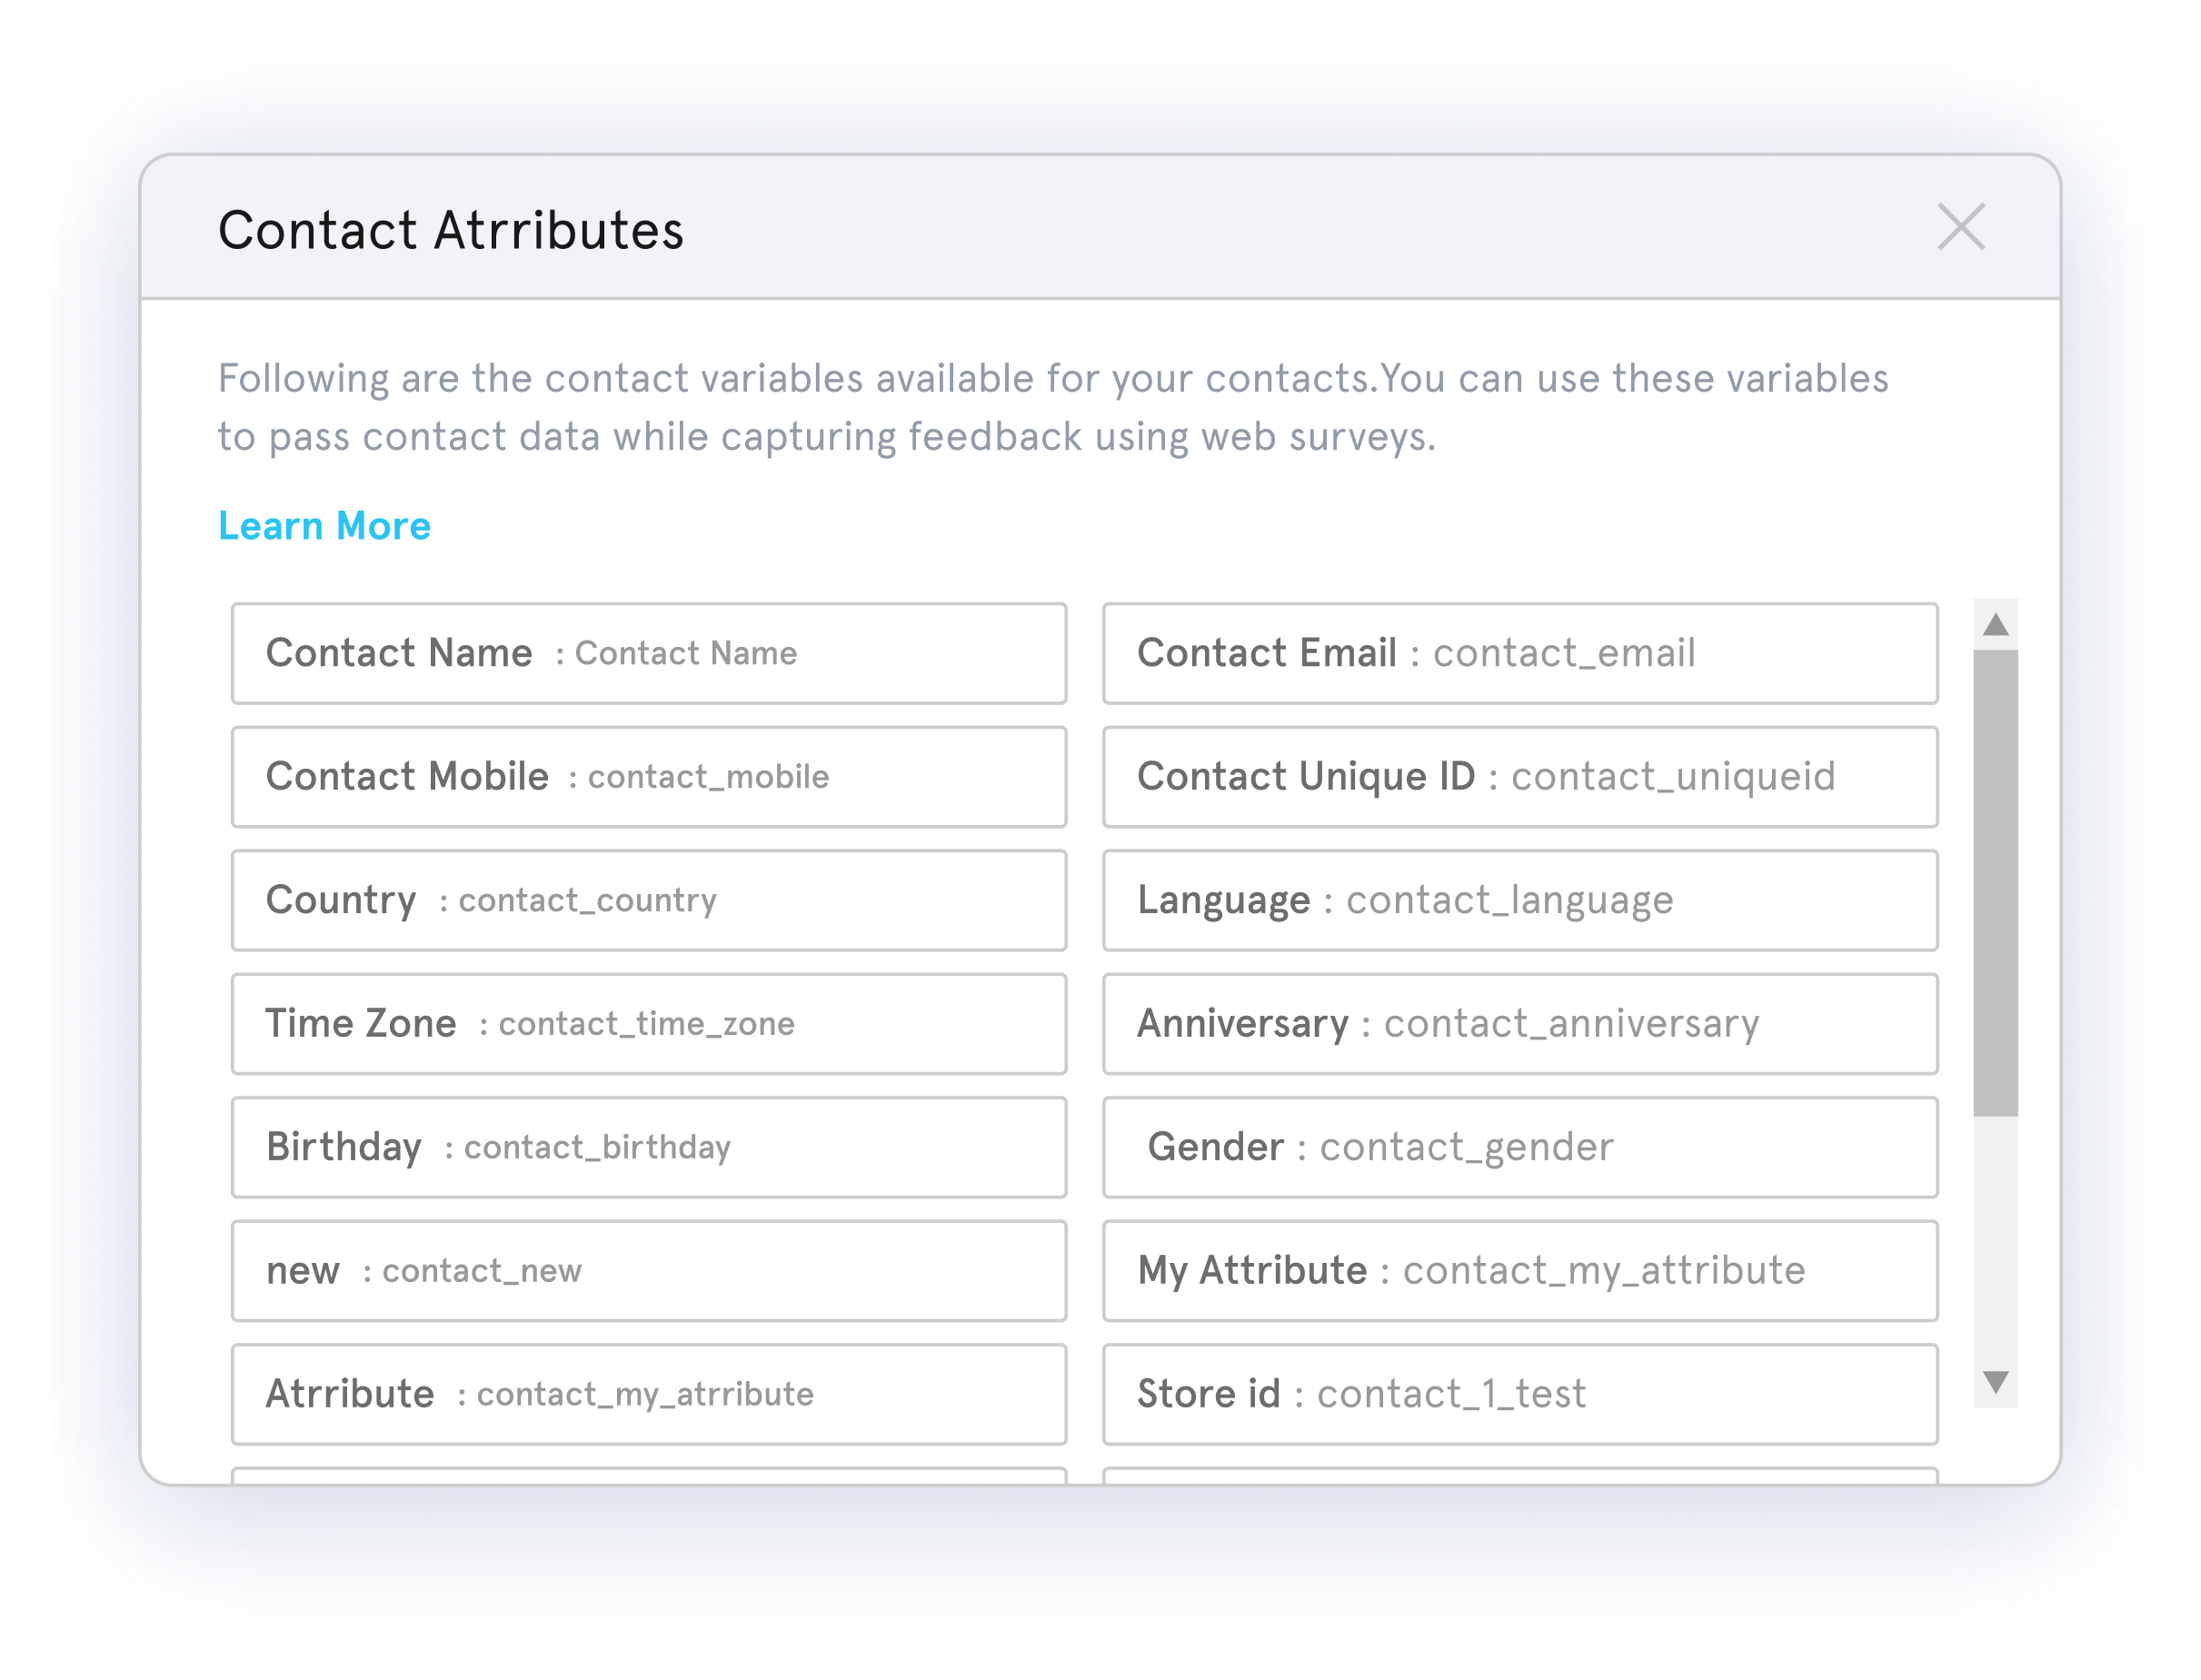 Contact Attributes of survey respondents in free survey maker